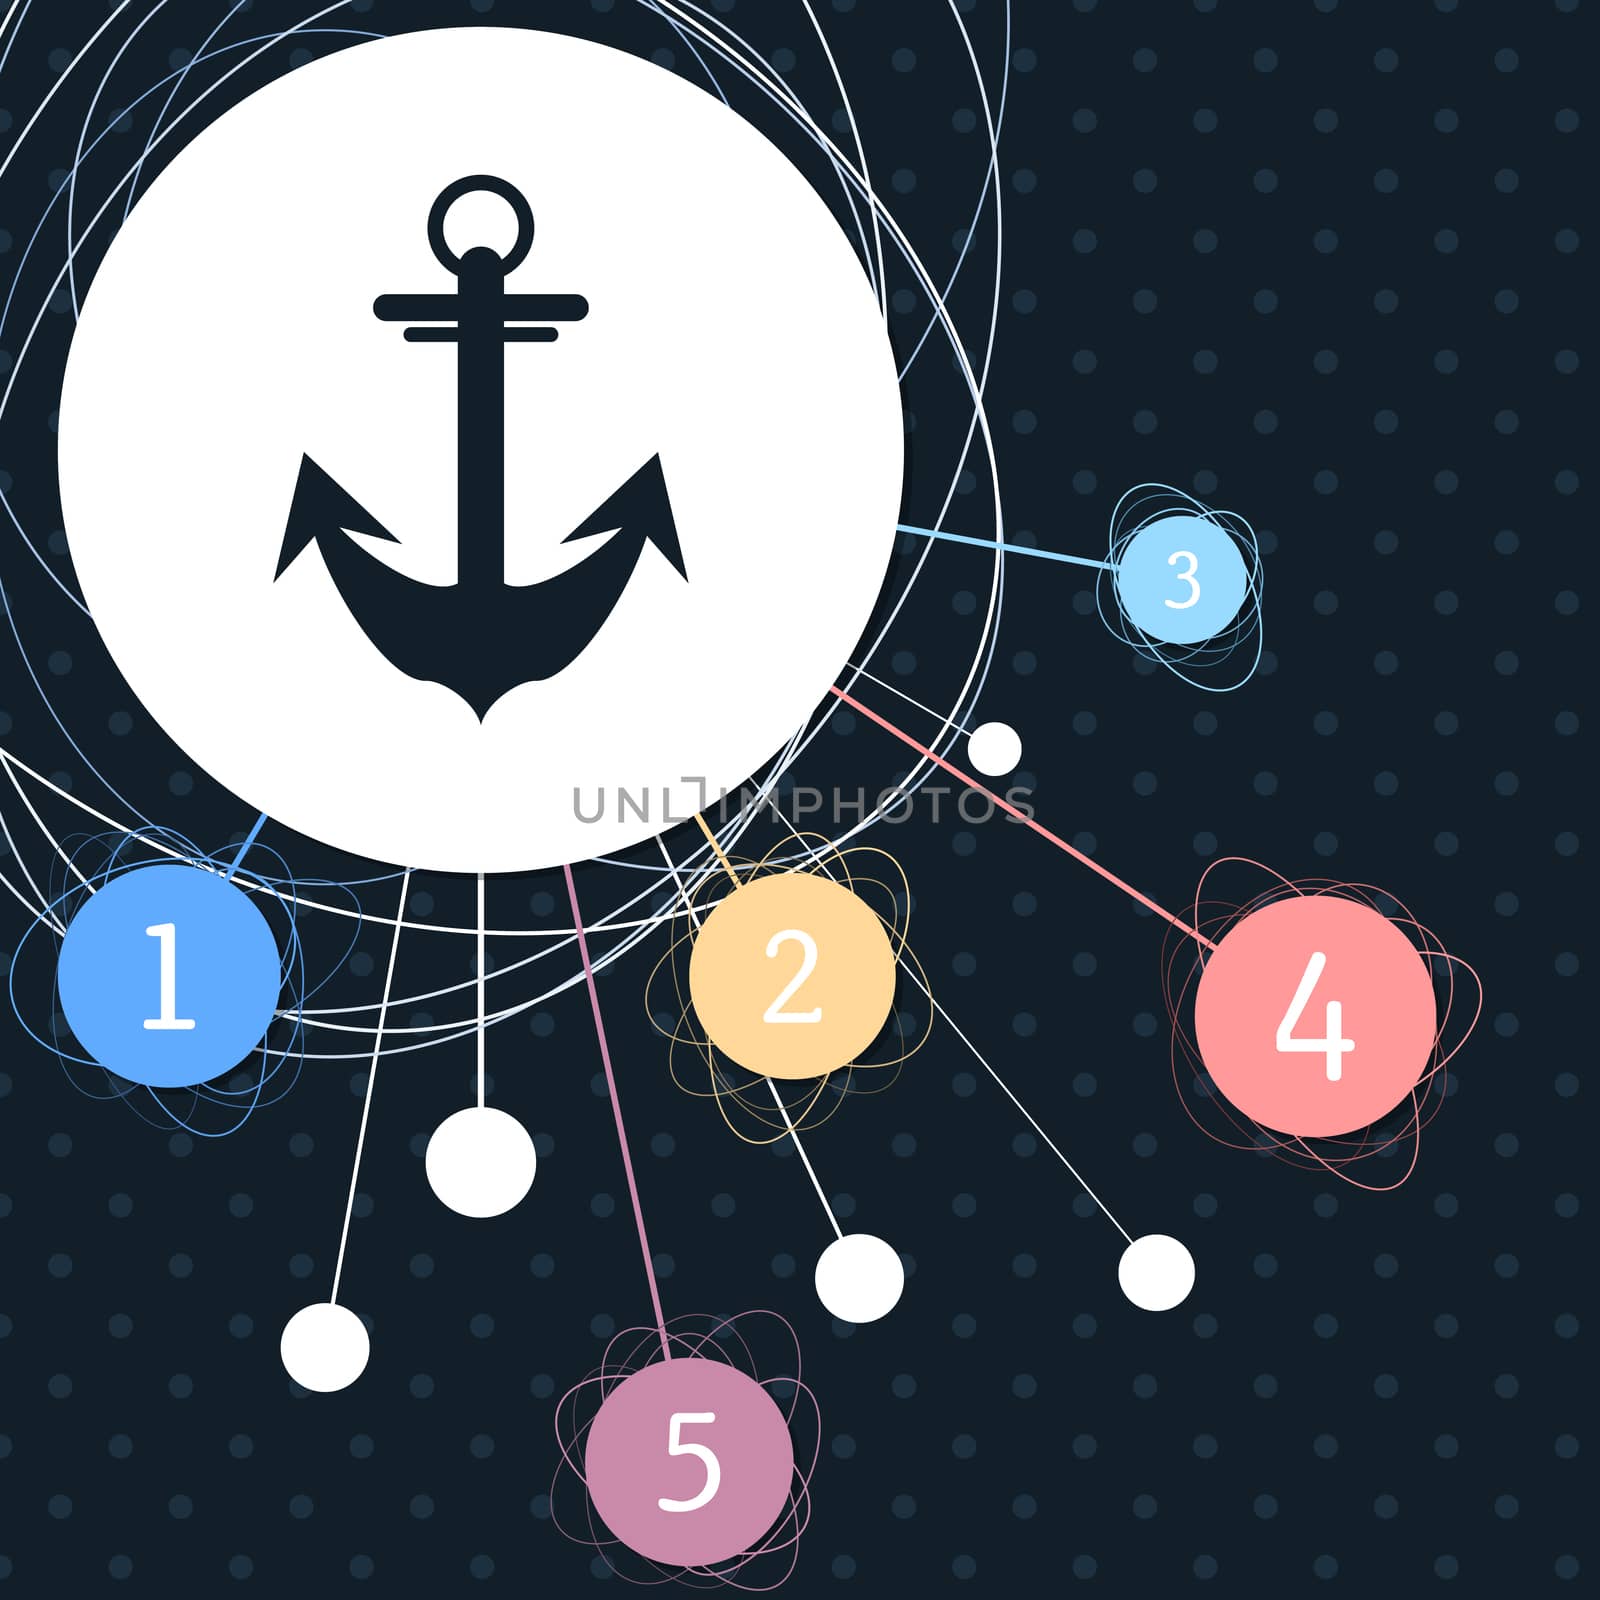 Anchor icon with the background to the point and with infographic style. illustration